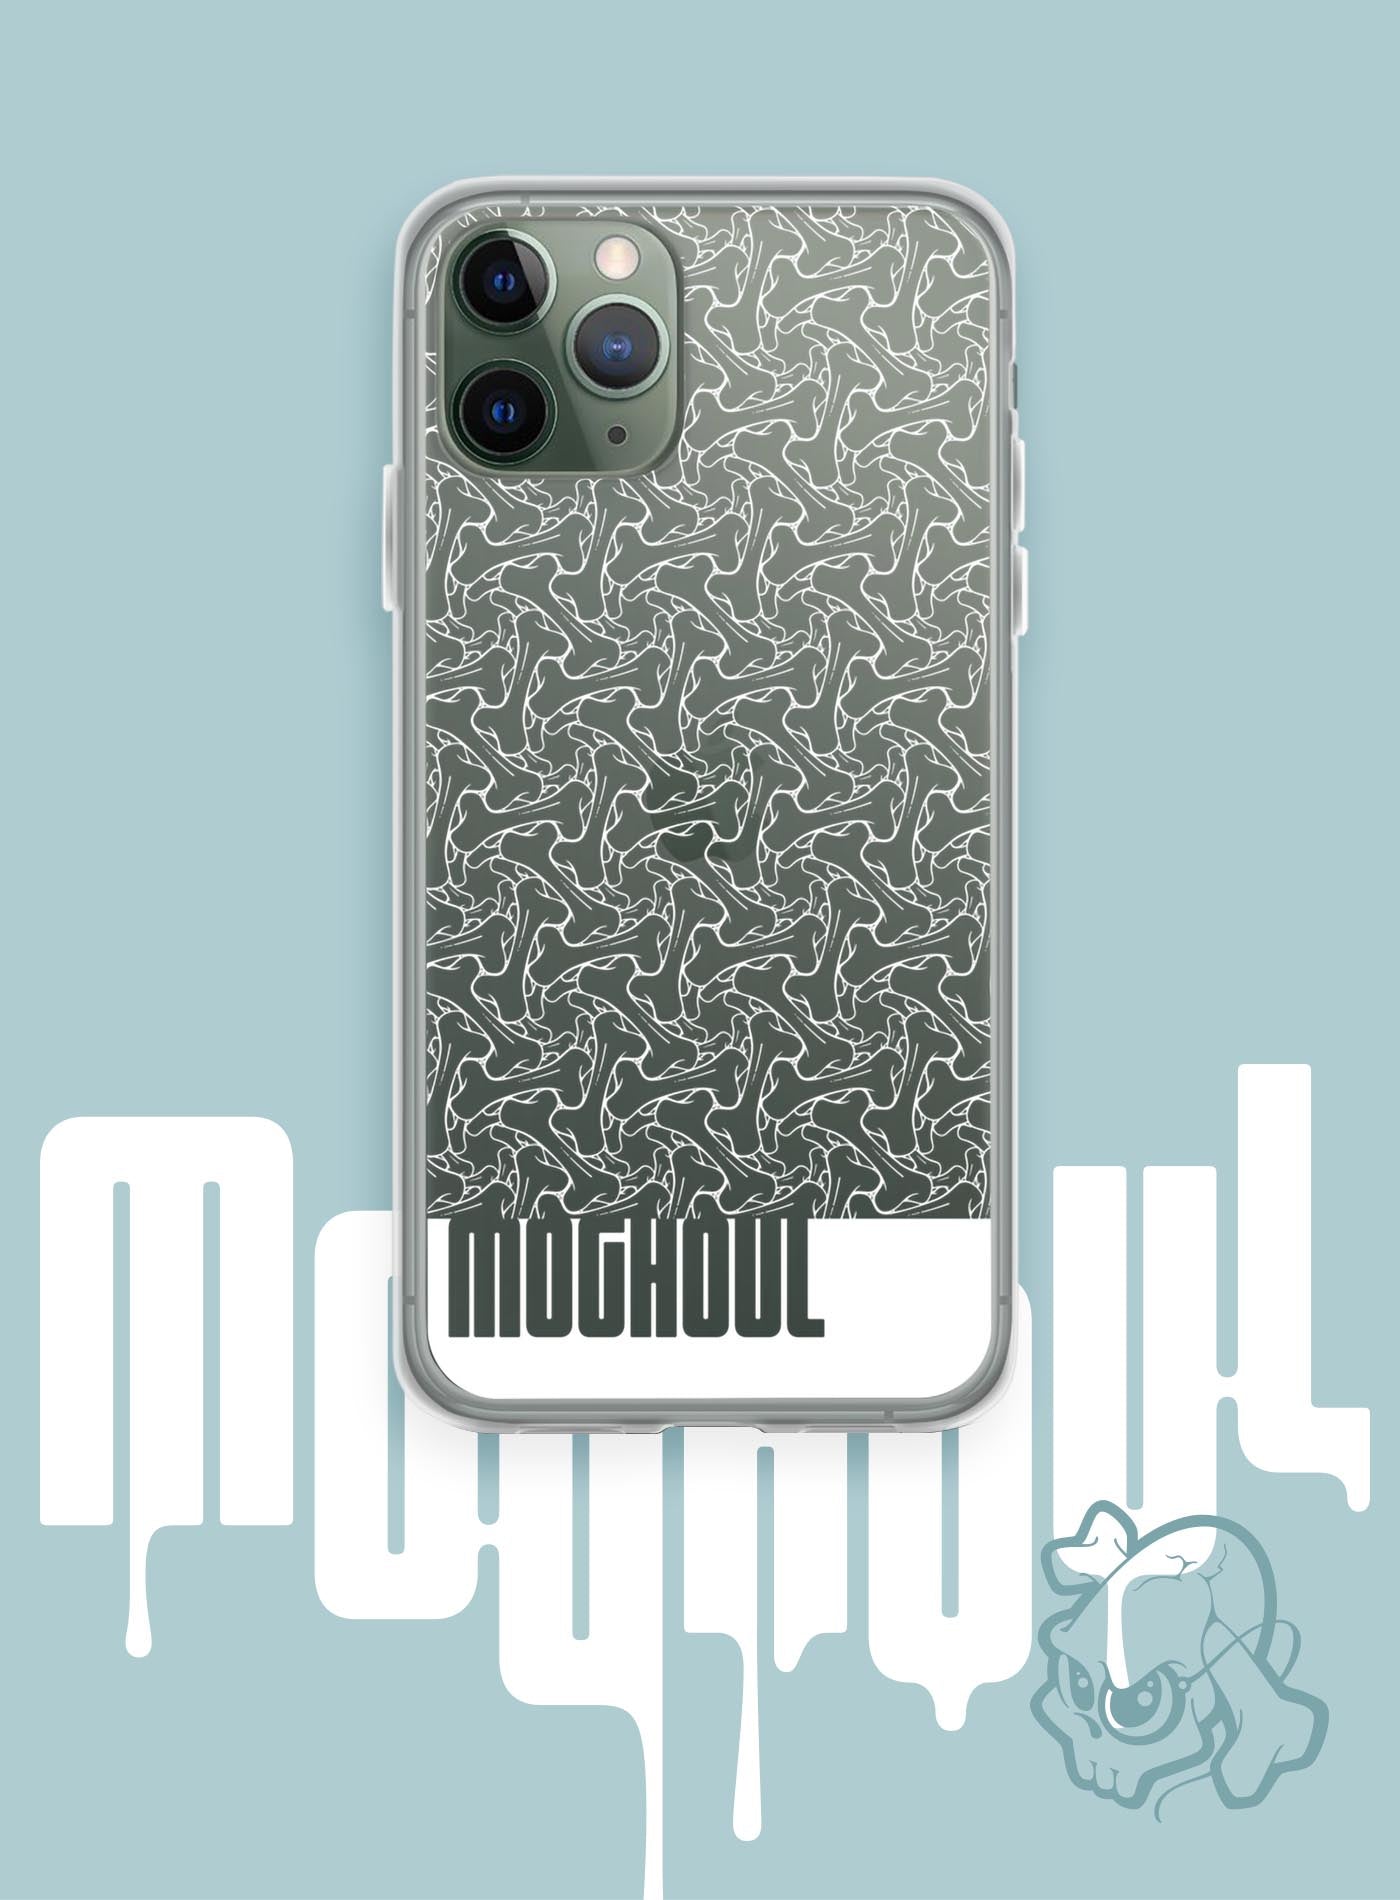 iPhone case featuring a patter of bones based on Islamic ornamental art in white color.